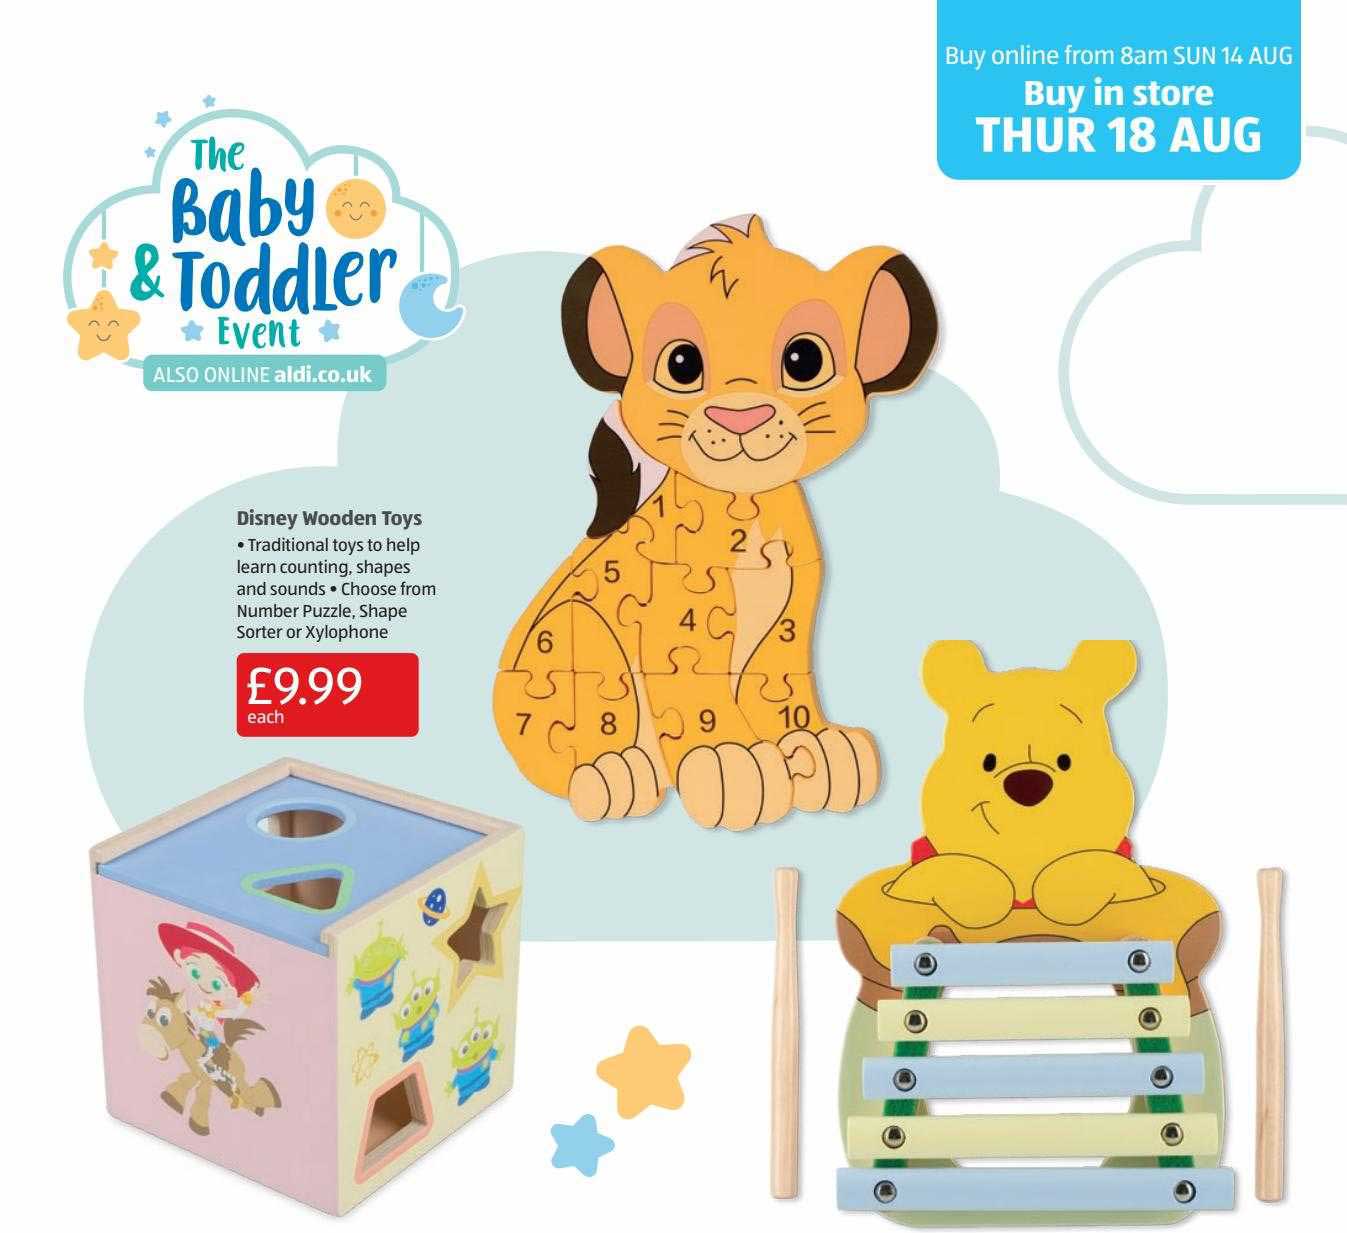 Aldi Disney Wooden Toys The Baby & Toddler